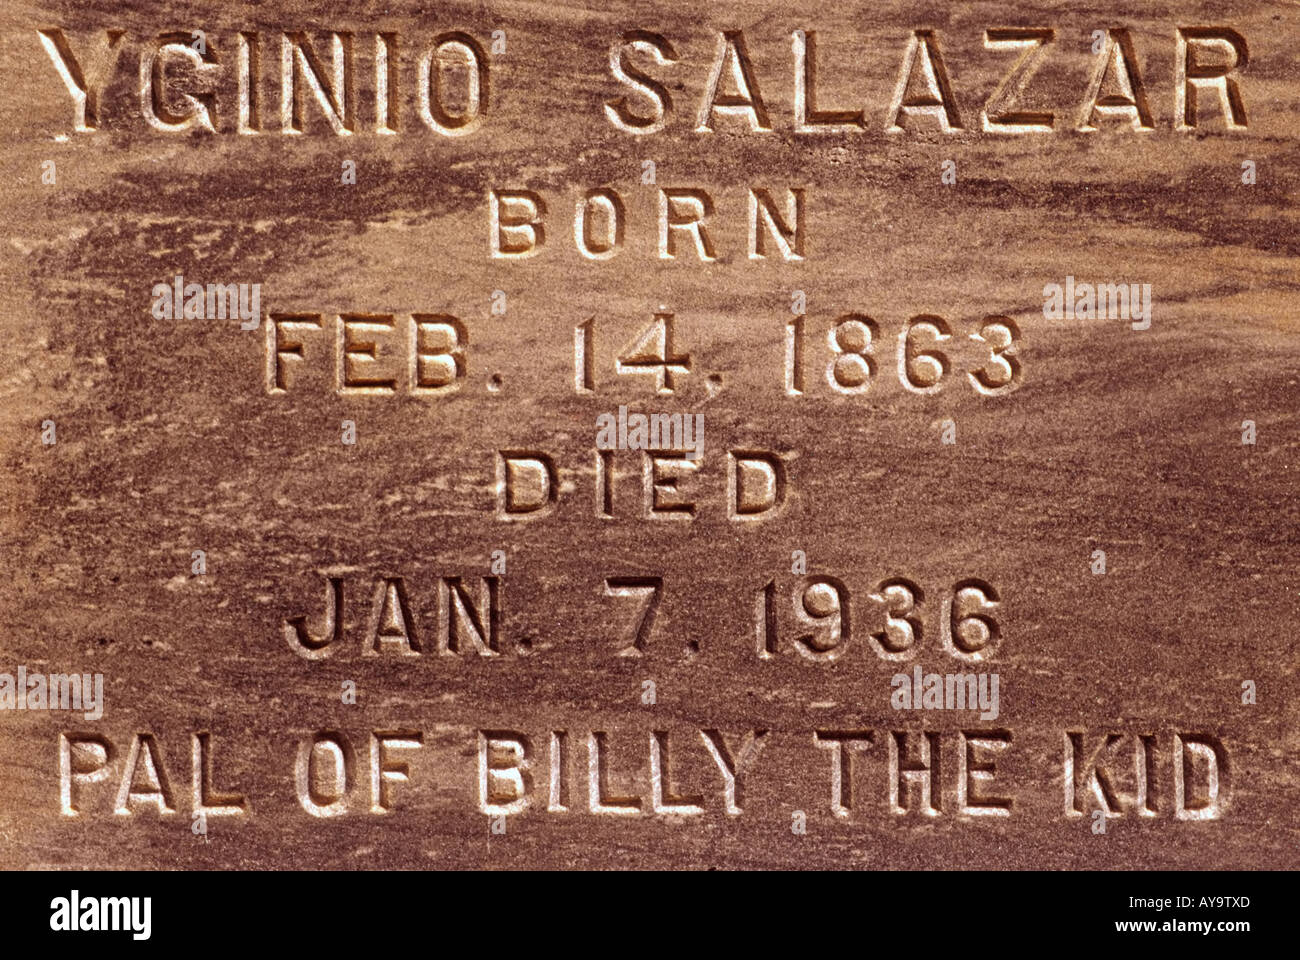 The unusual epitaph of Yginio Salazar, 'Pal of Billy the Kid', at the old cemetery in Lincoln, New  Mexico. Stock Photo